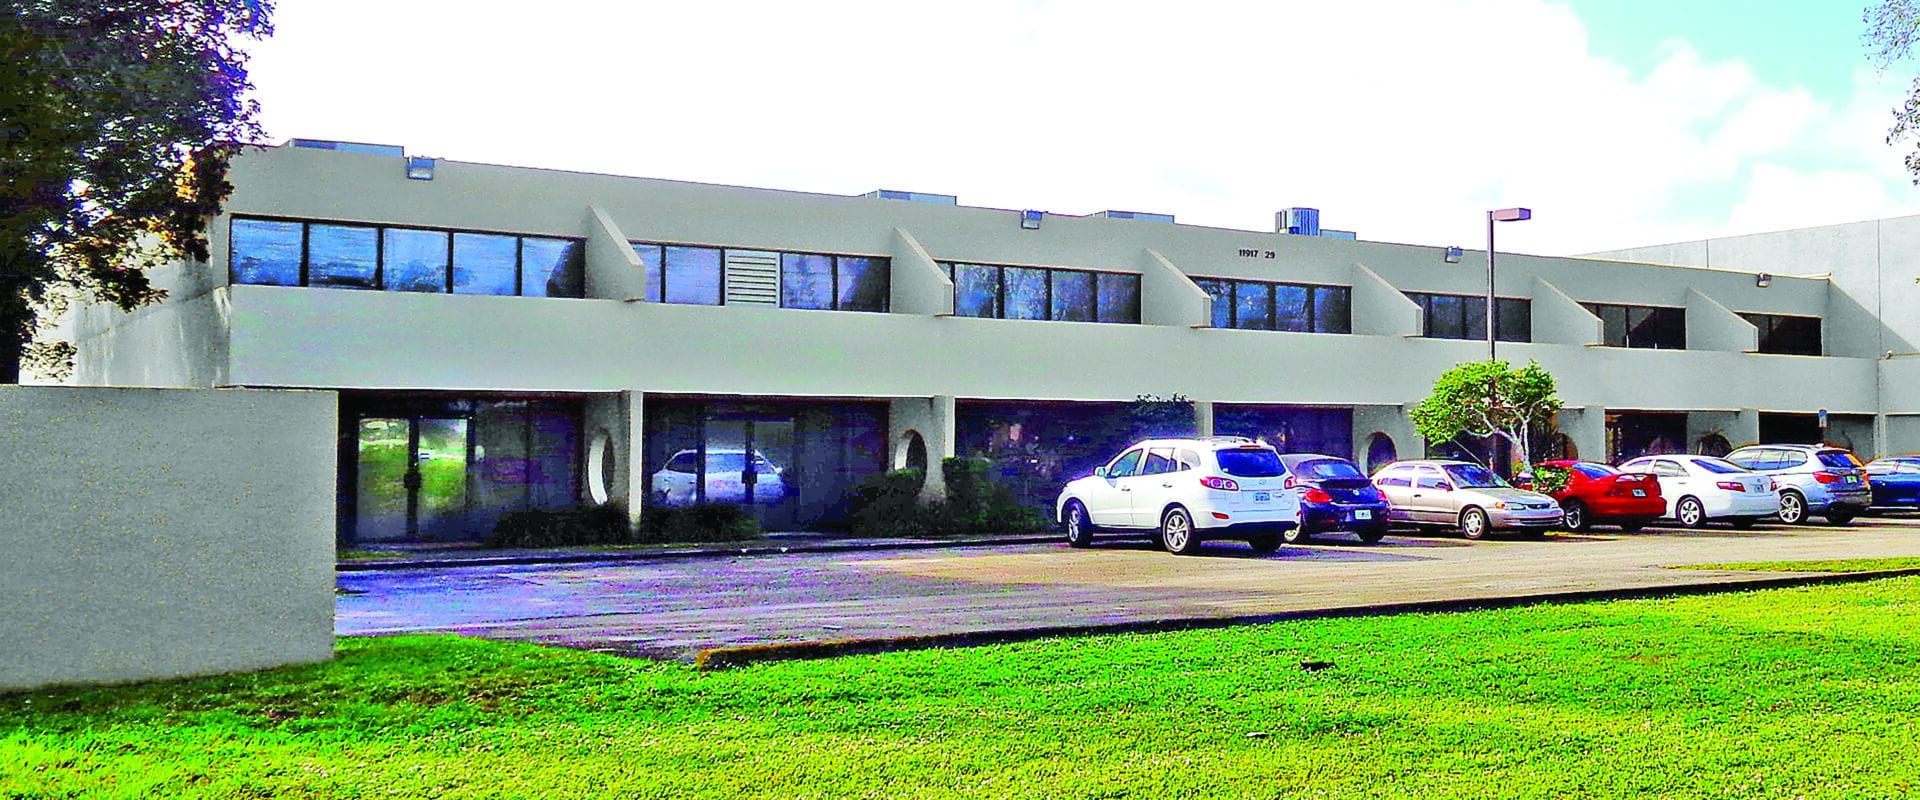 Office/Warehouse for Lease 25,400 SF | Coral Springs